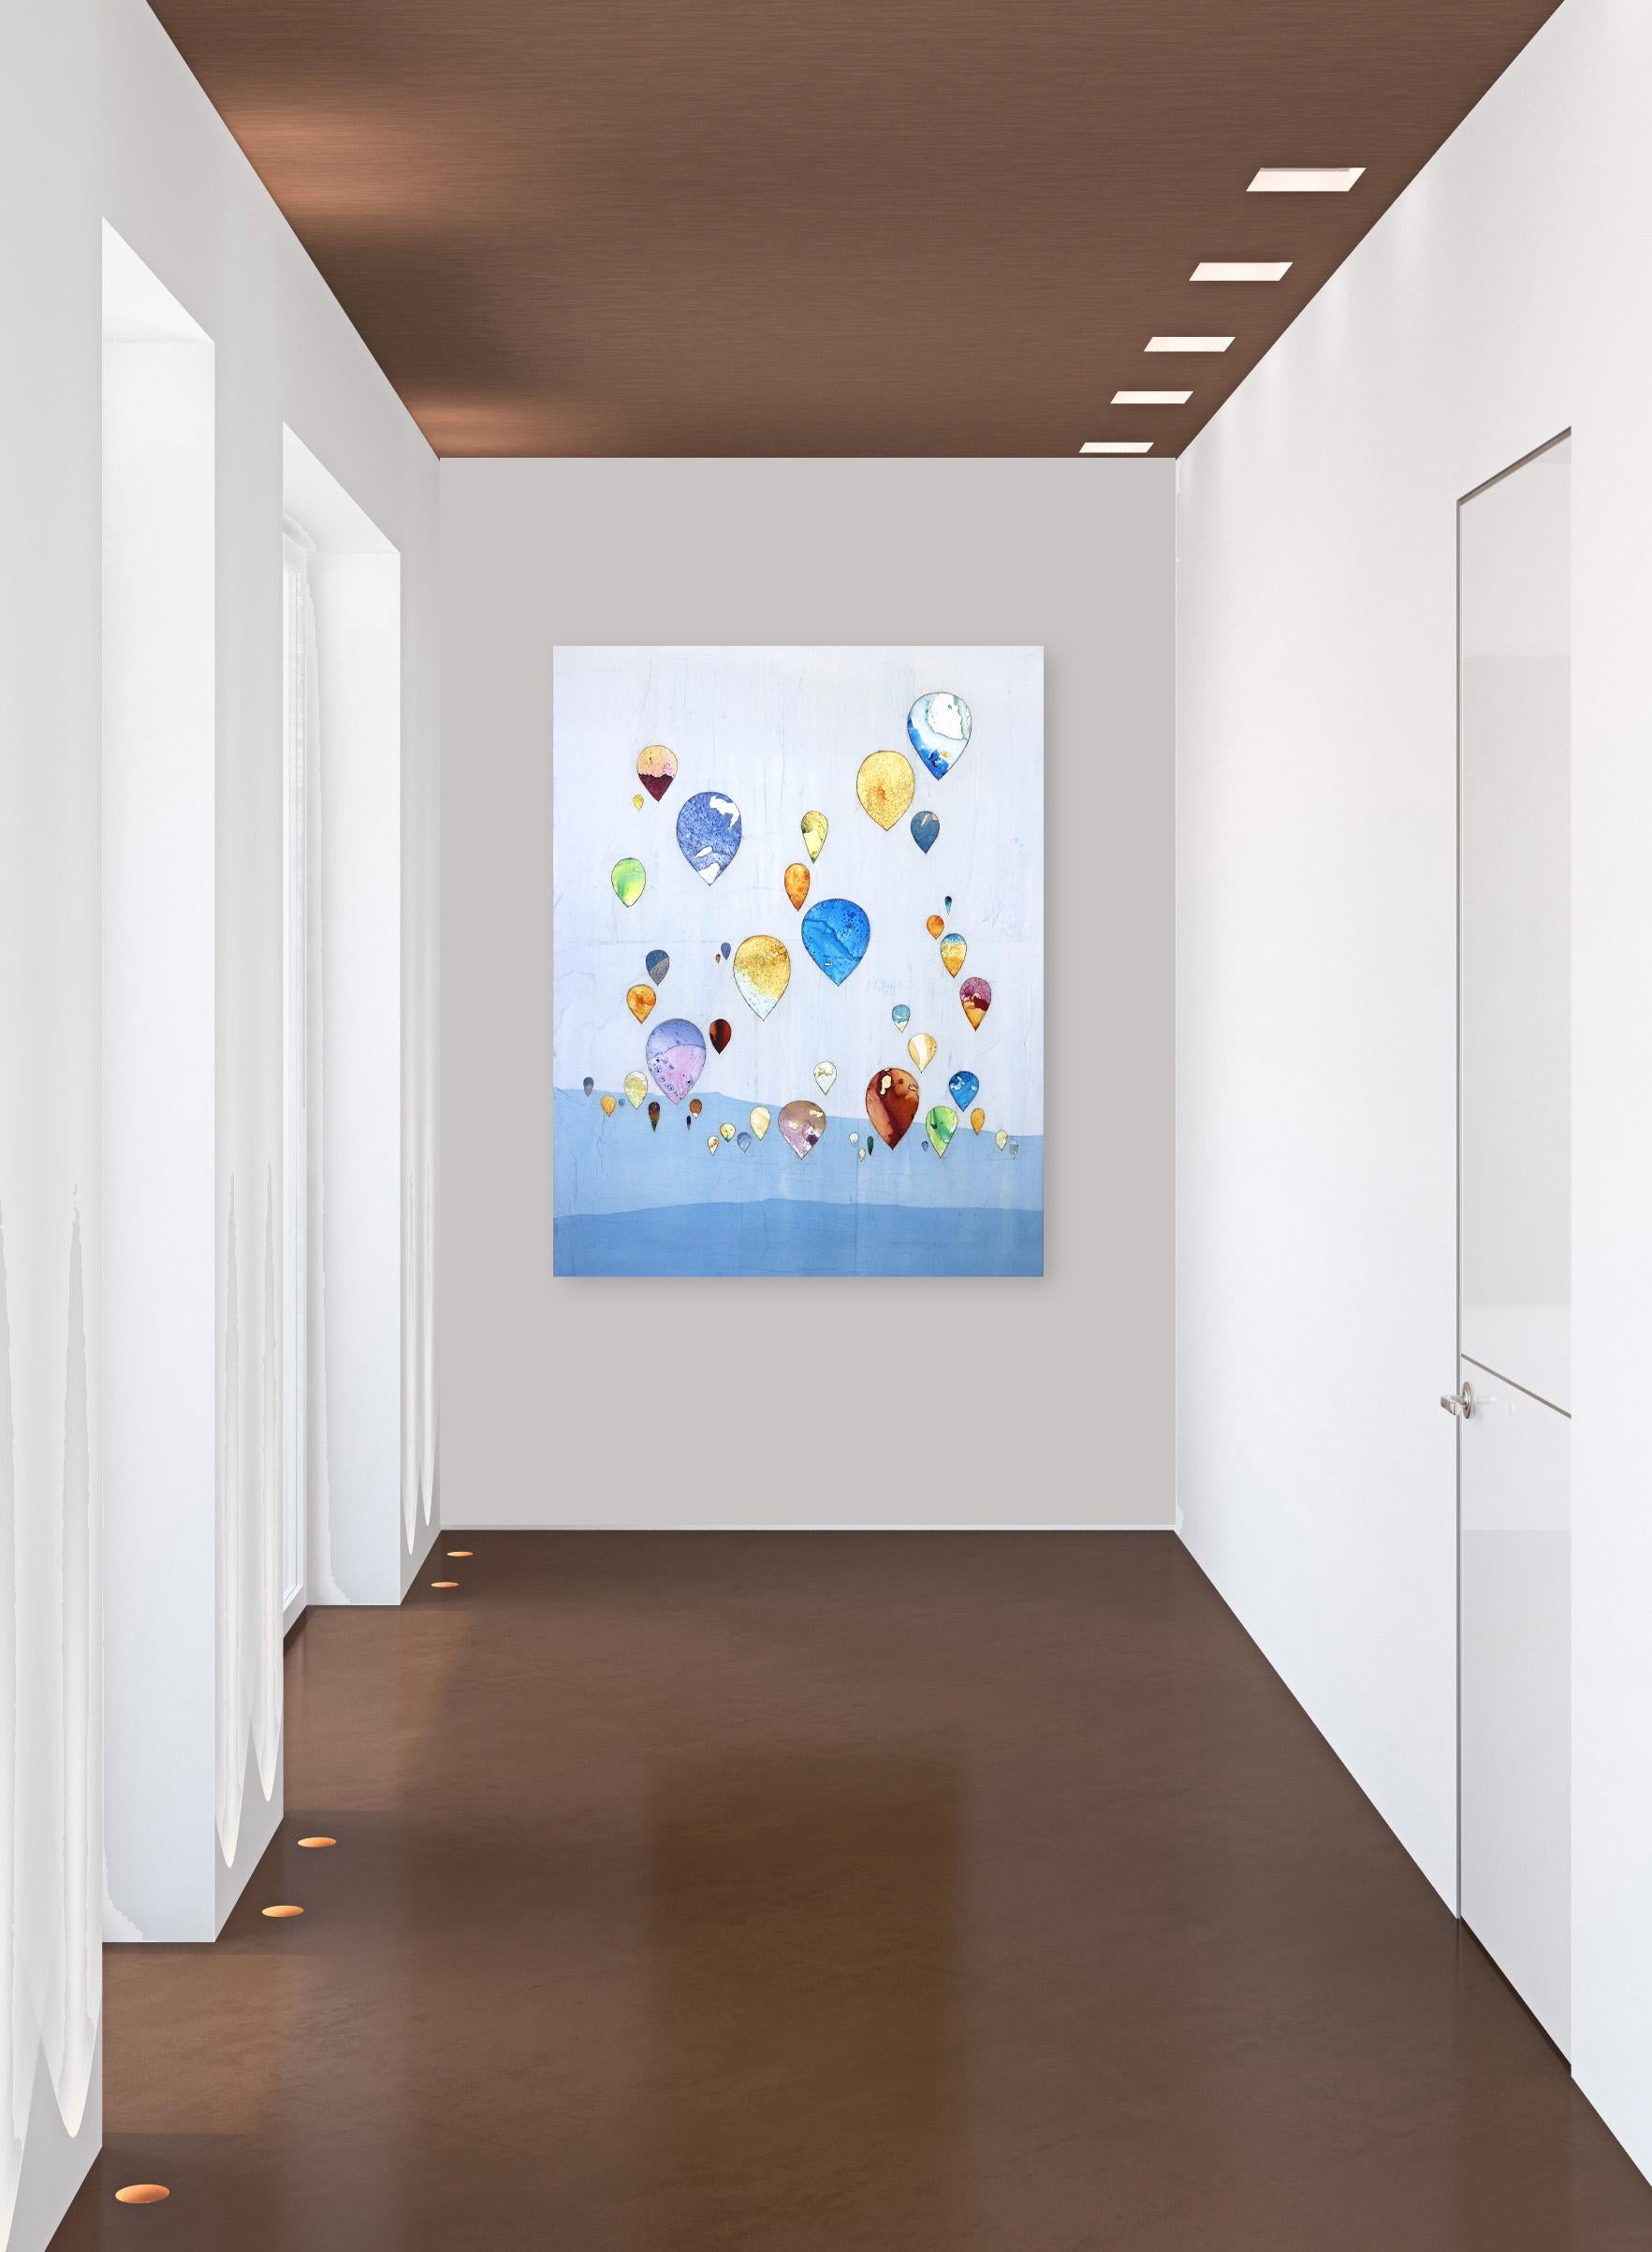 With Flying Colors - Large Original Boho Minimalist Landscape Balloon Artwork - Painting by Peter Kuttner